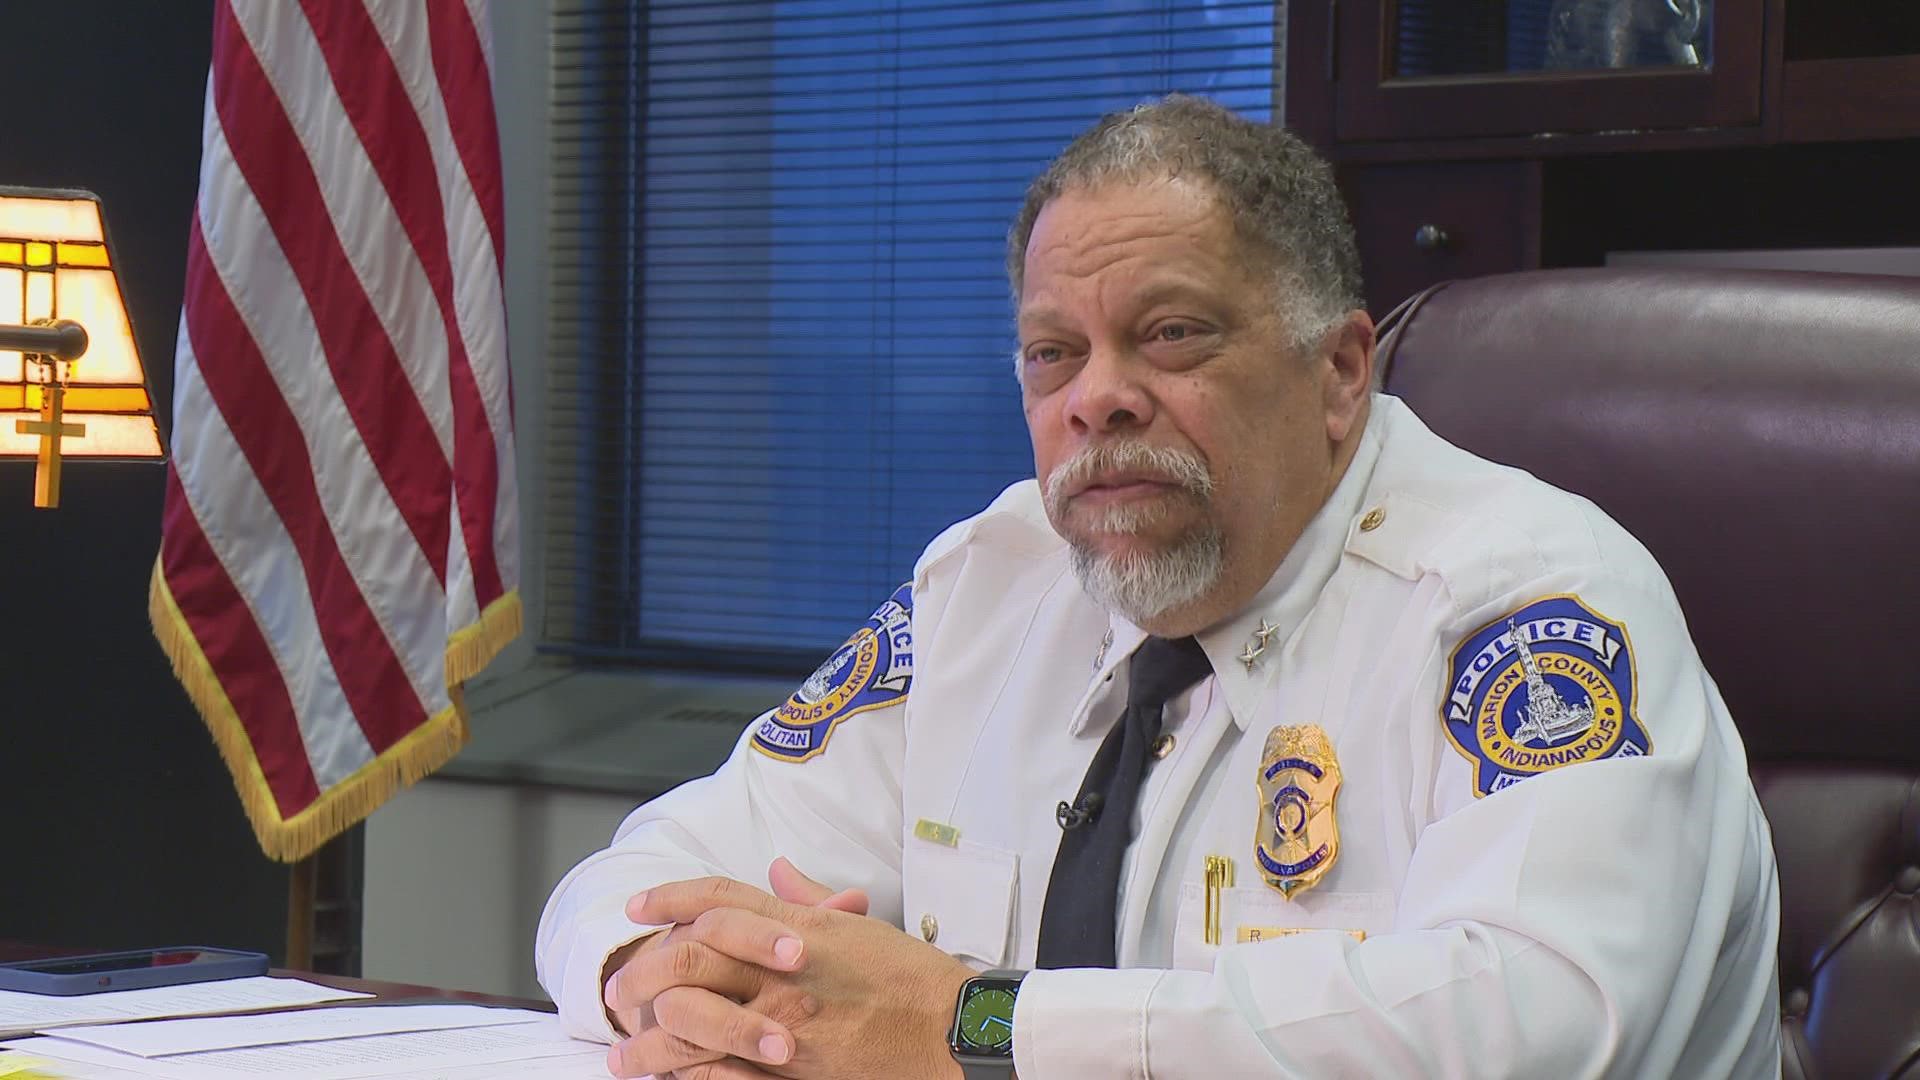 Indianapolis Police Chief Randall Taylor said crime is trending down across the country.